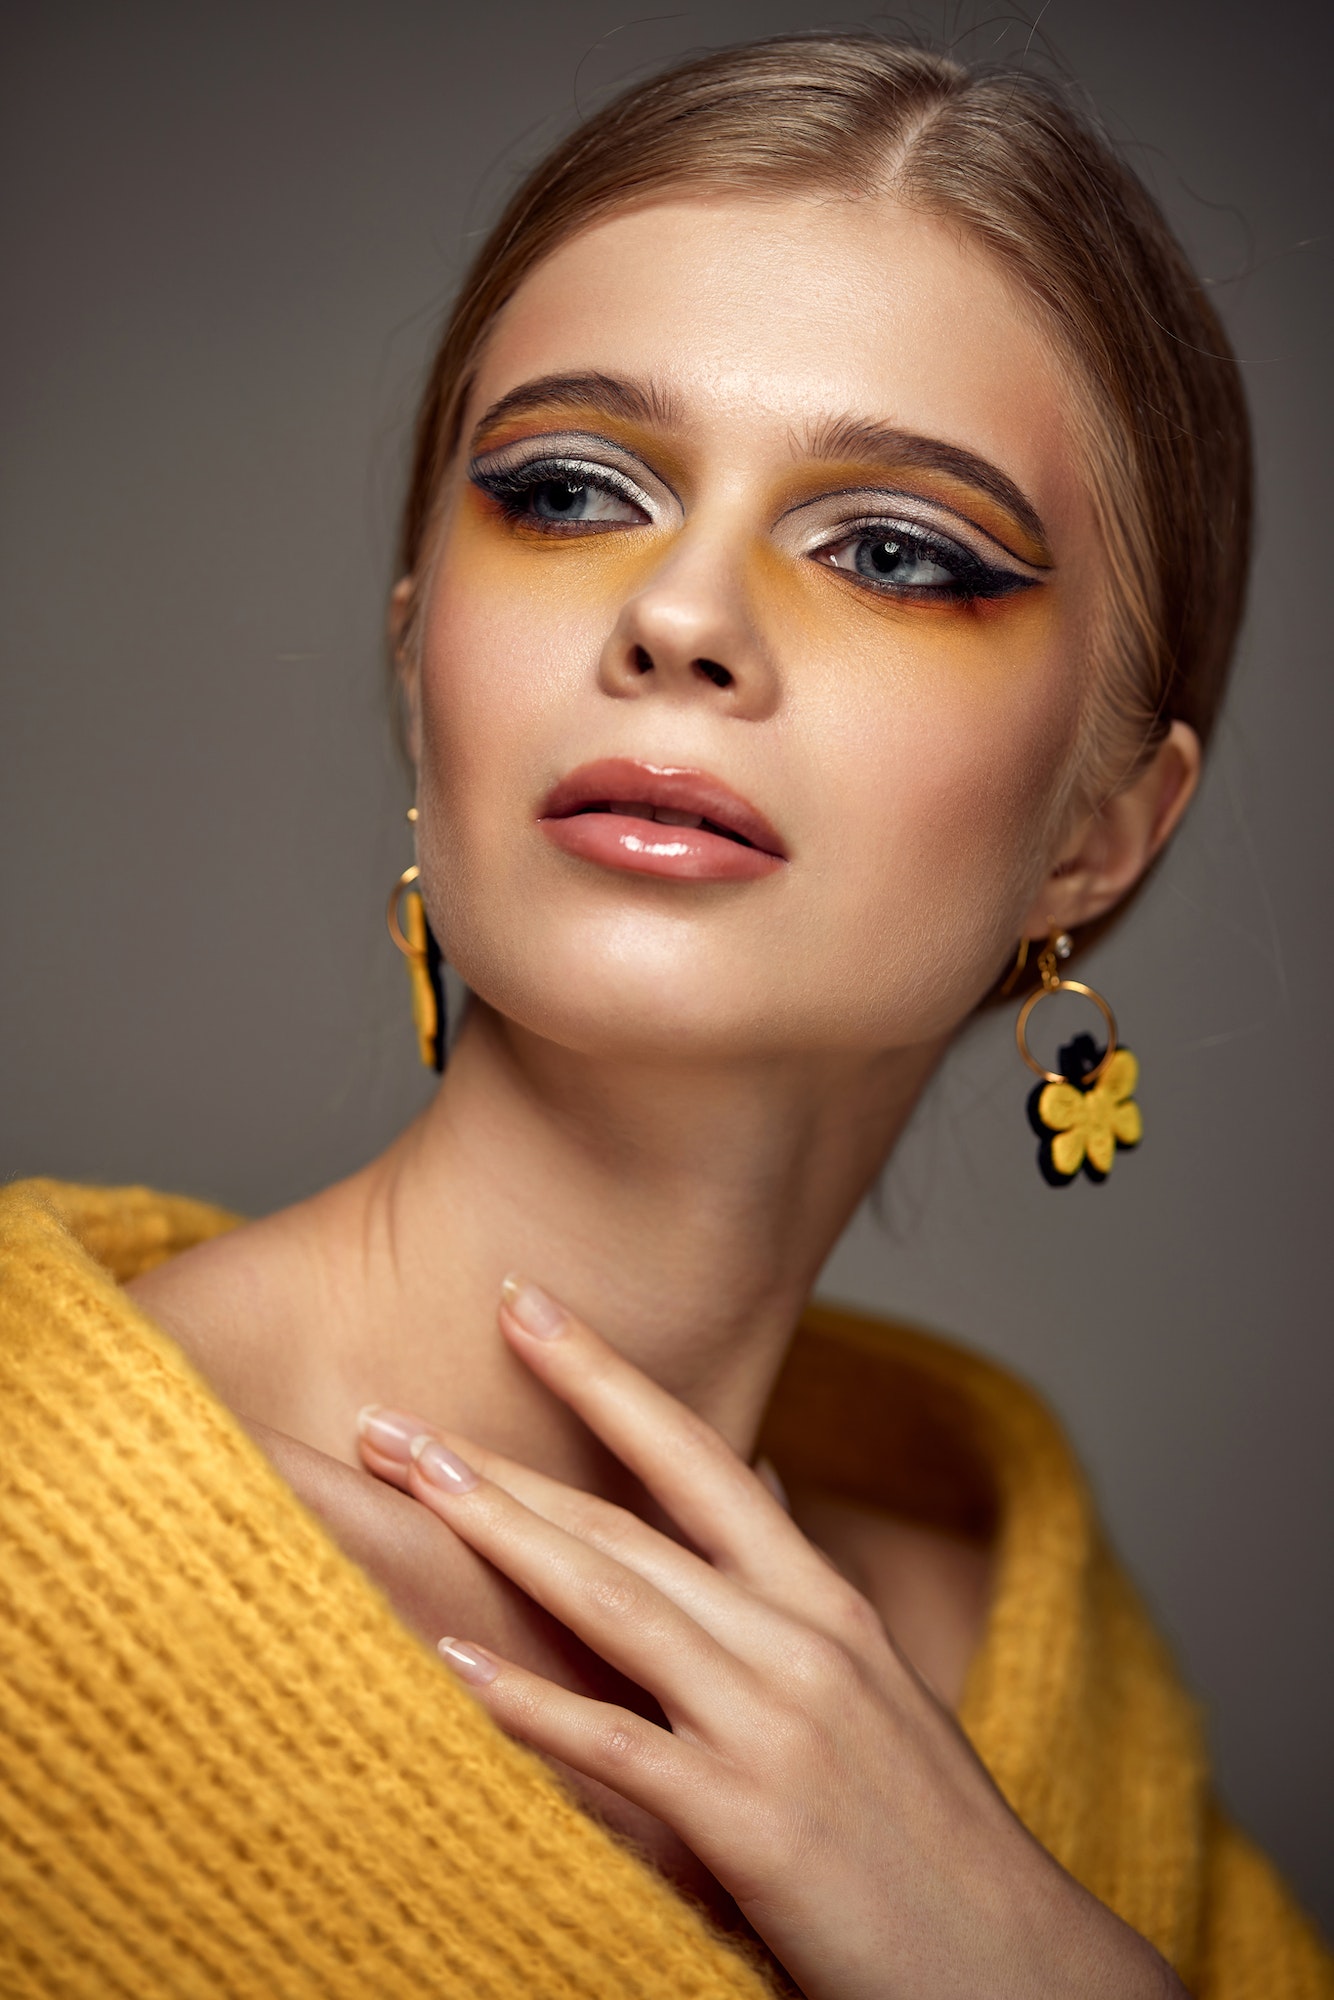 Beauty blonde model girl with fashionable creative make-up